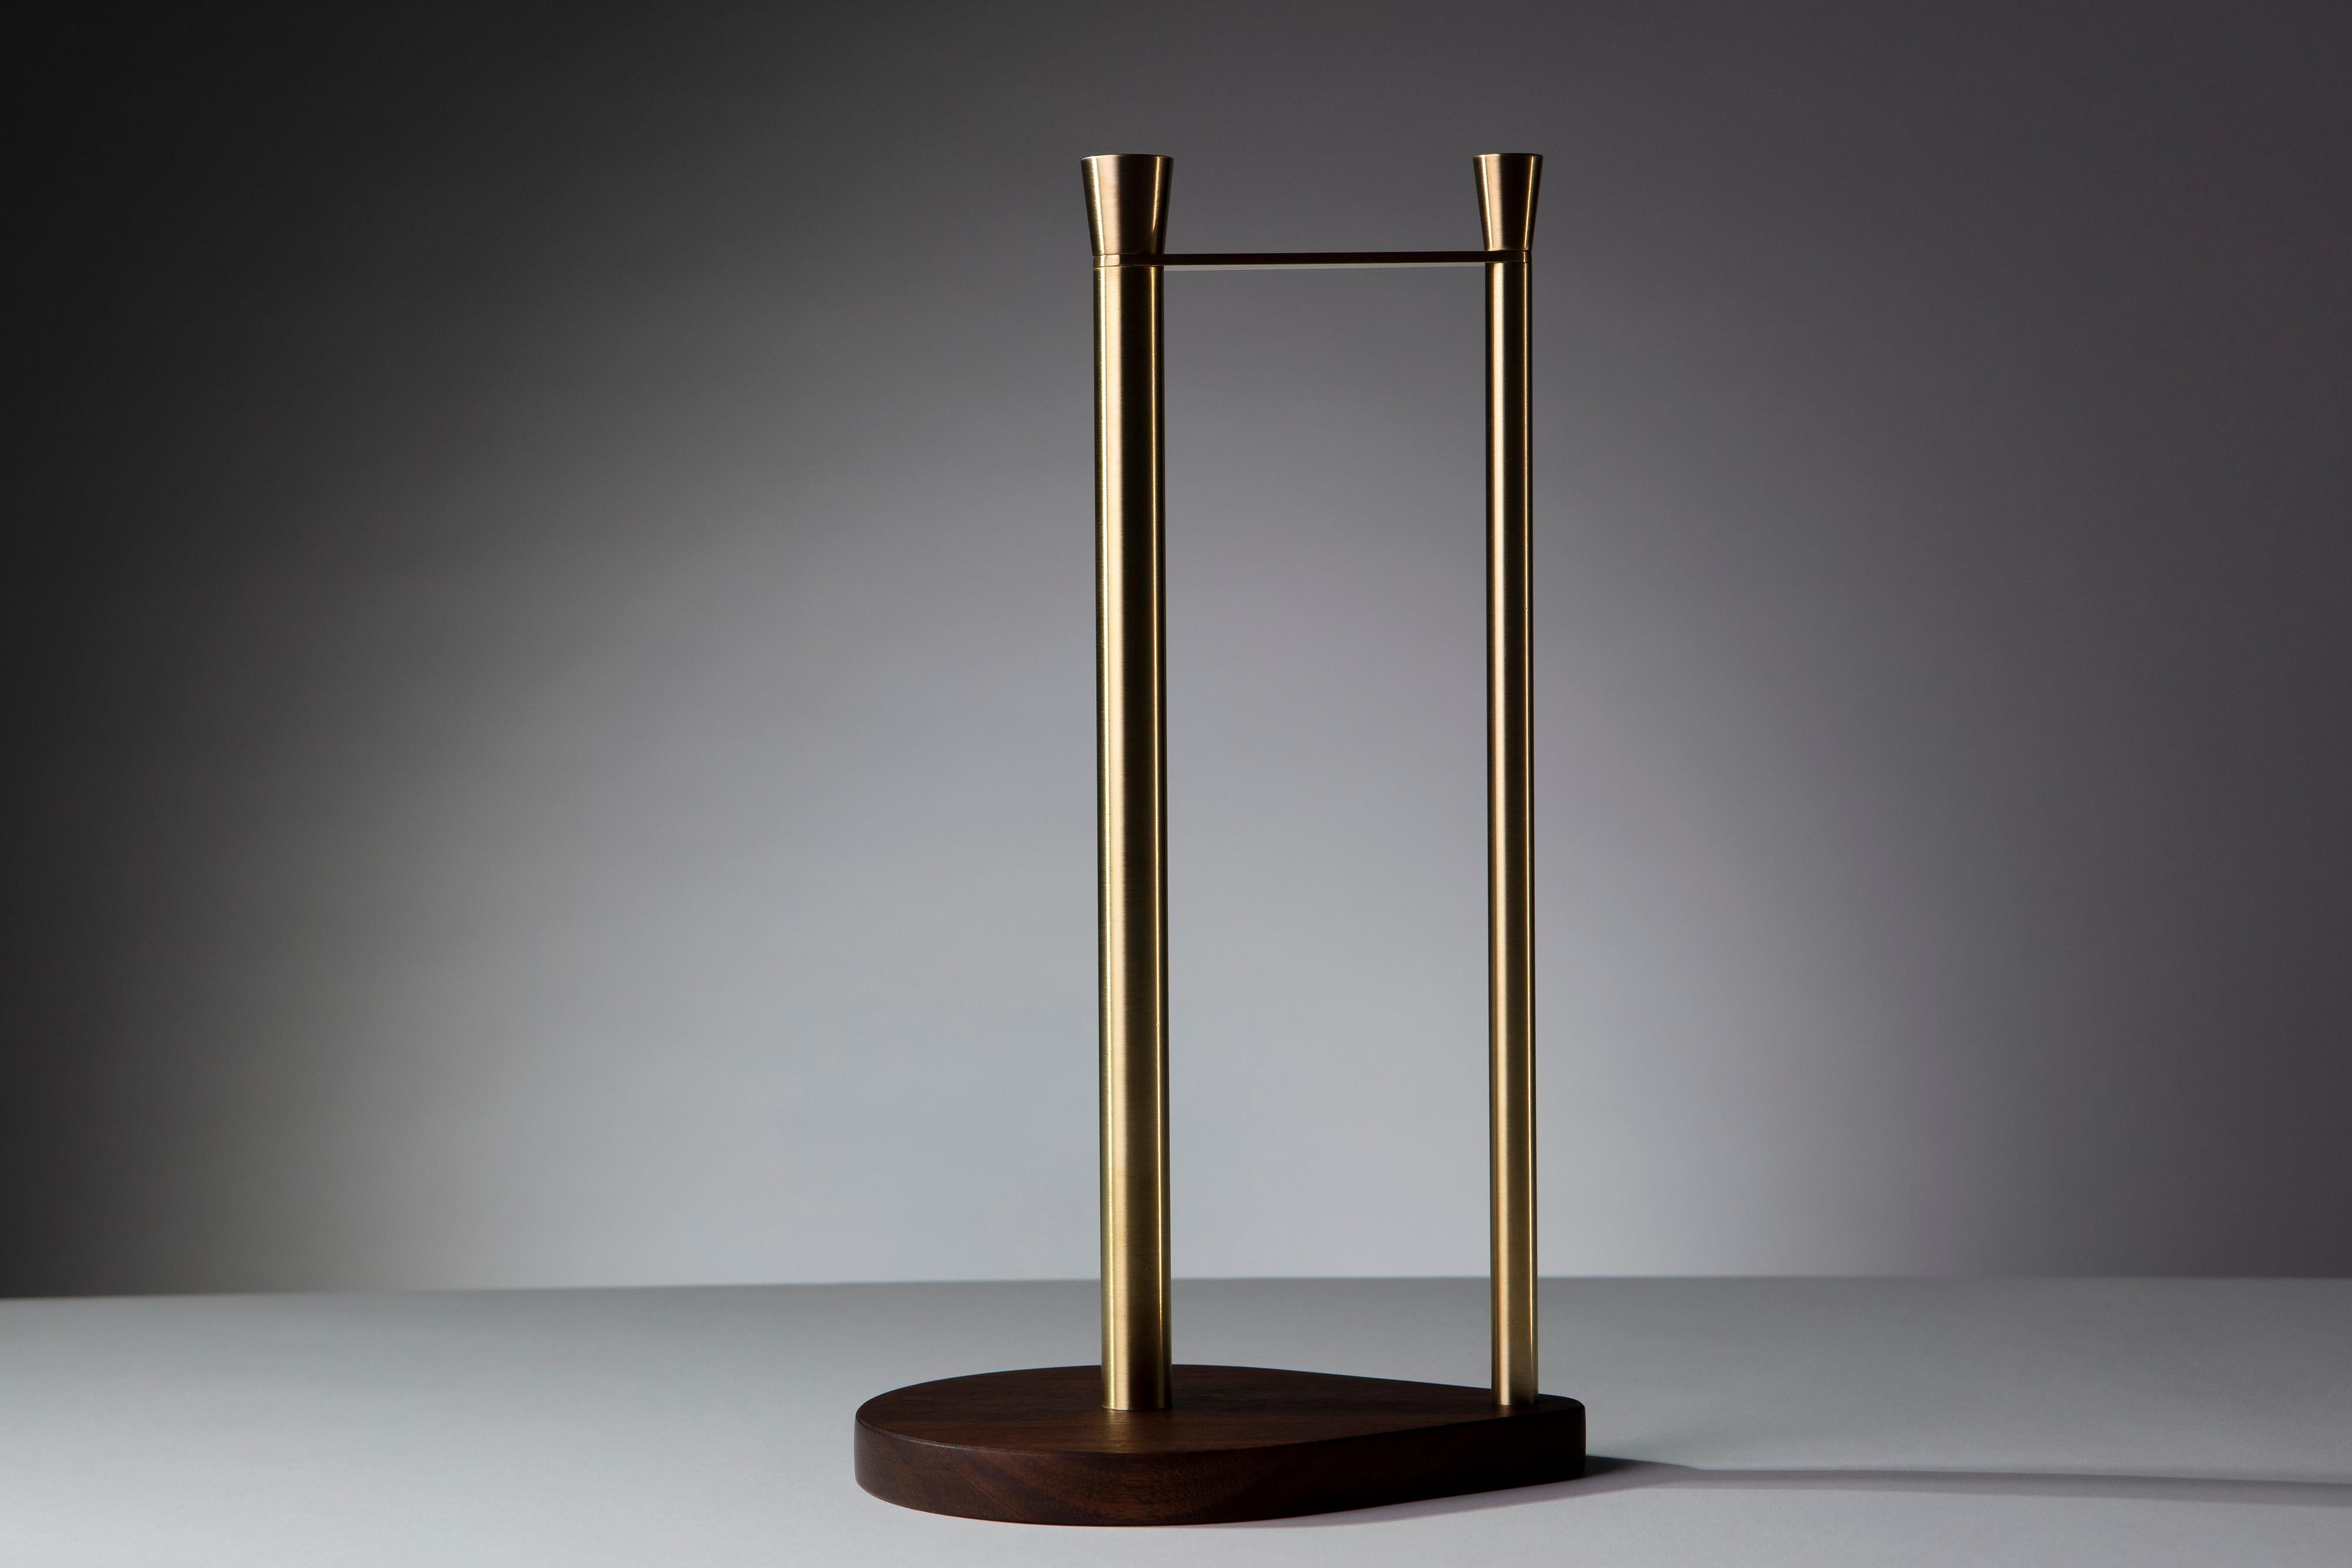 Elegant modernist unlacquered brass paper towel holder with a walnut base finished in a hardwax oil. The brass finish will naturally patina and deepen with time.